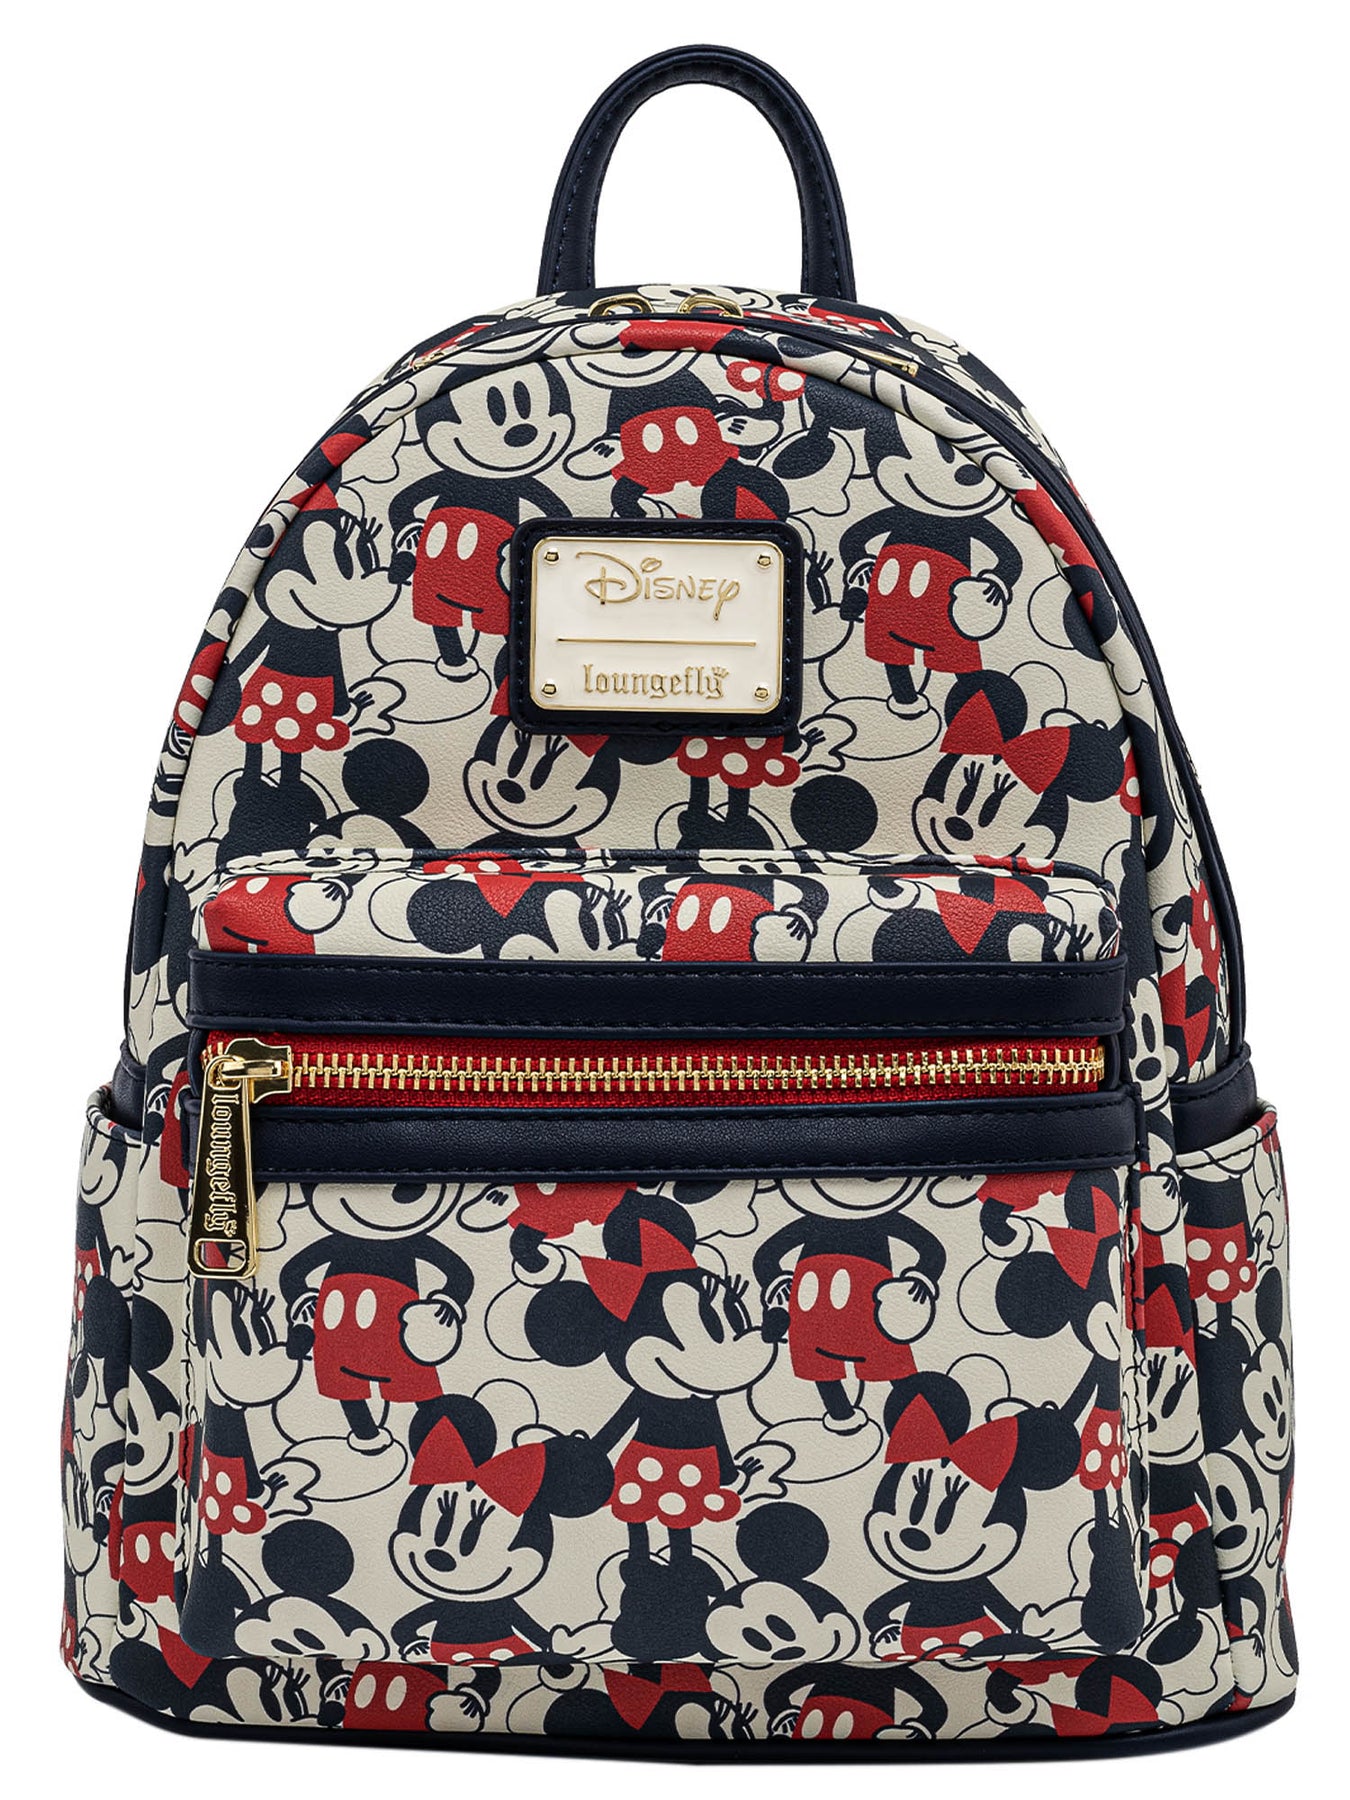 Loungefly Sale|loungefly Disney Mickey Backpack - Sequin Cartoon Schoolbag  For Kids